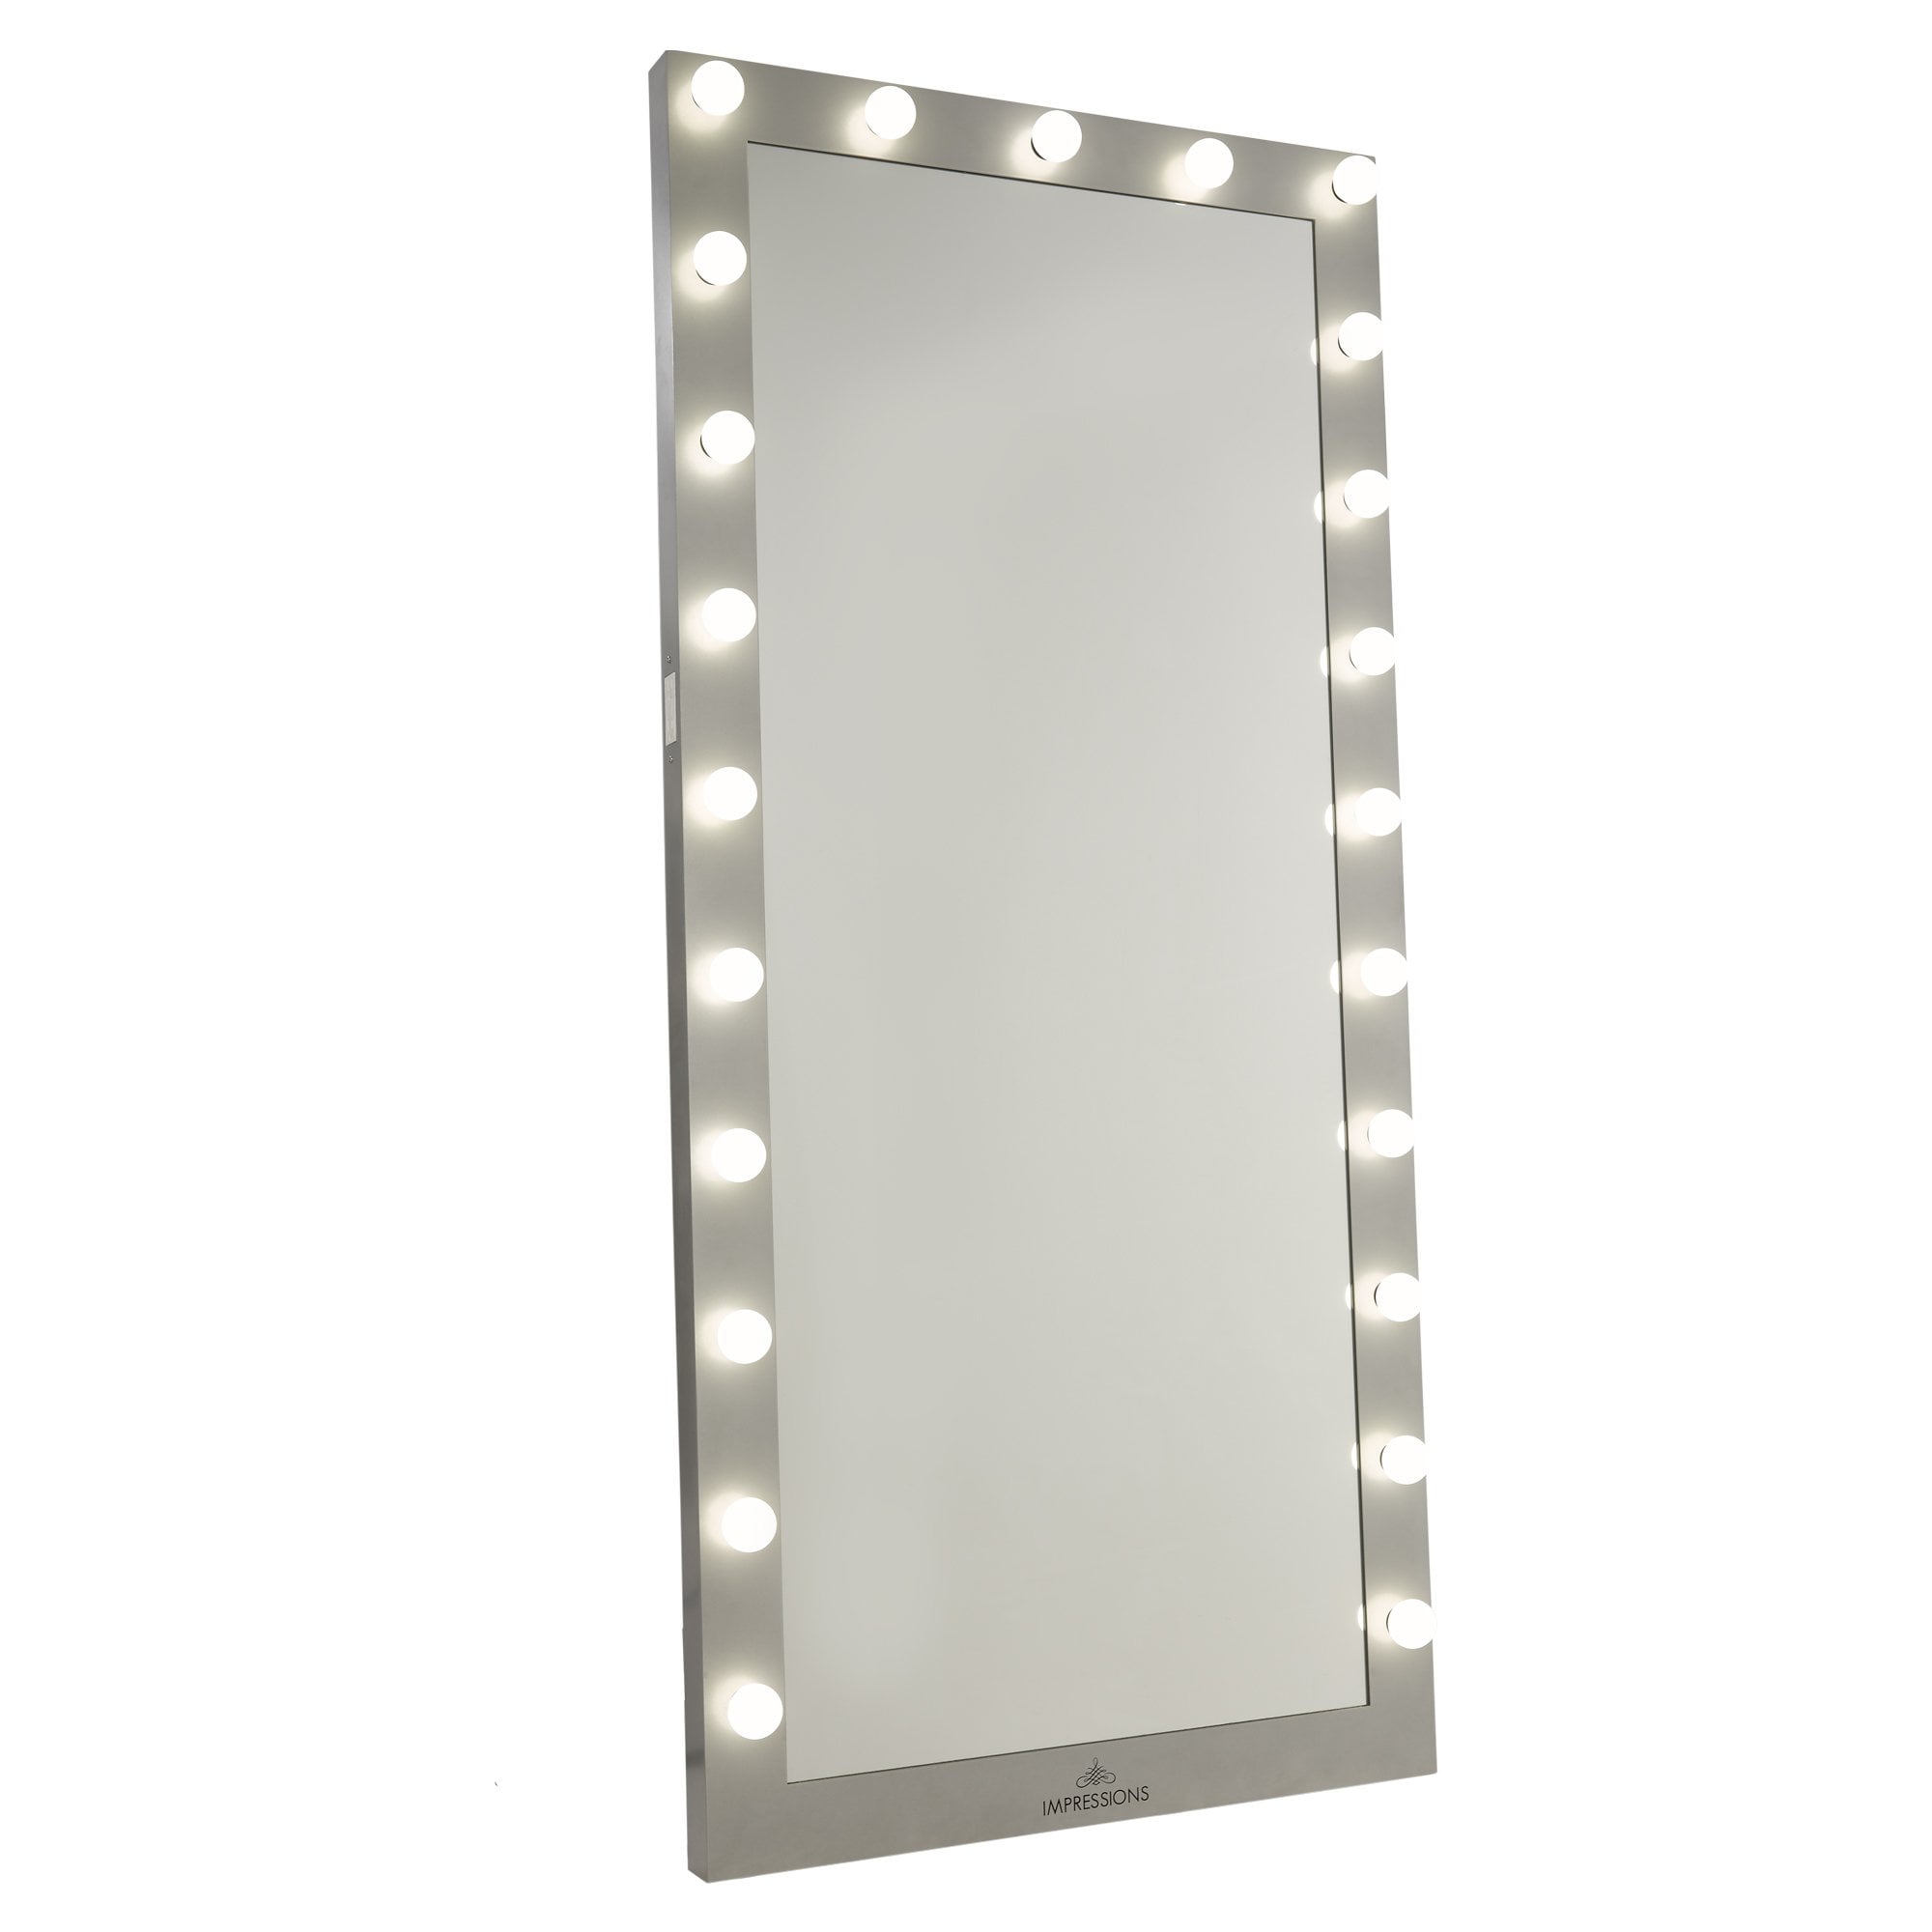 Impressions Hollywood Iconic Full, Impressions Vanity Standing Mirror